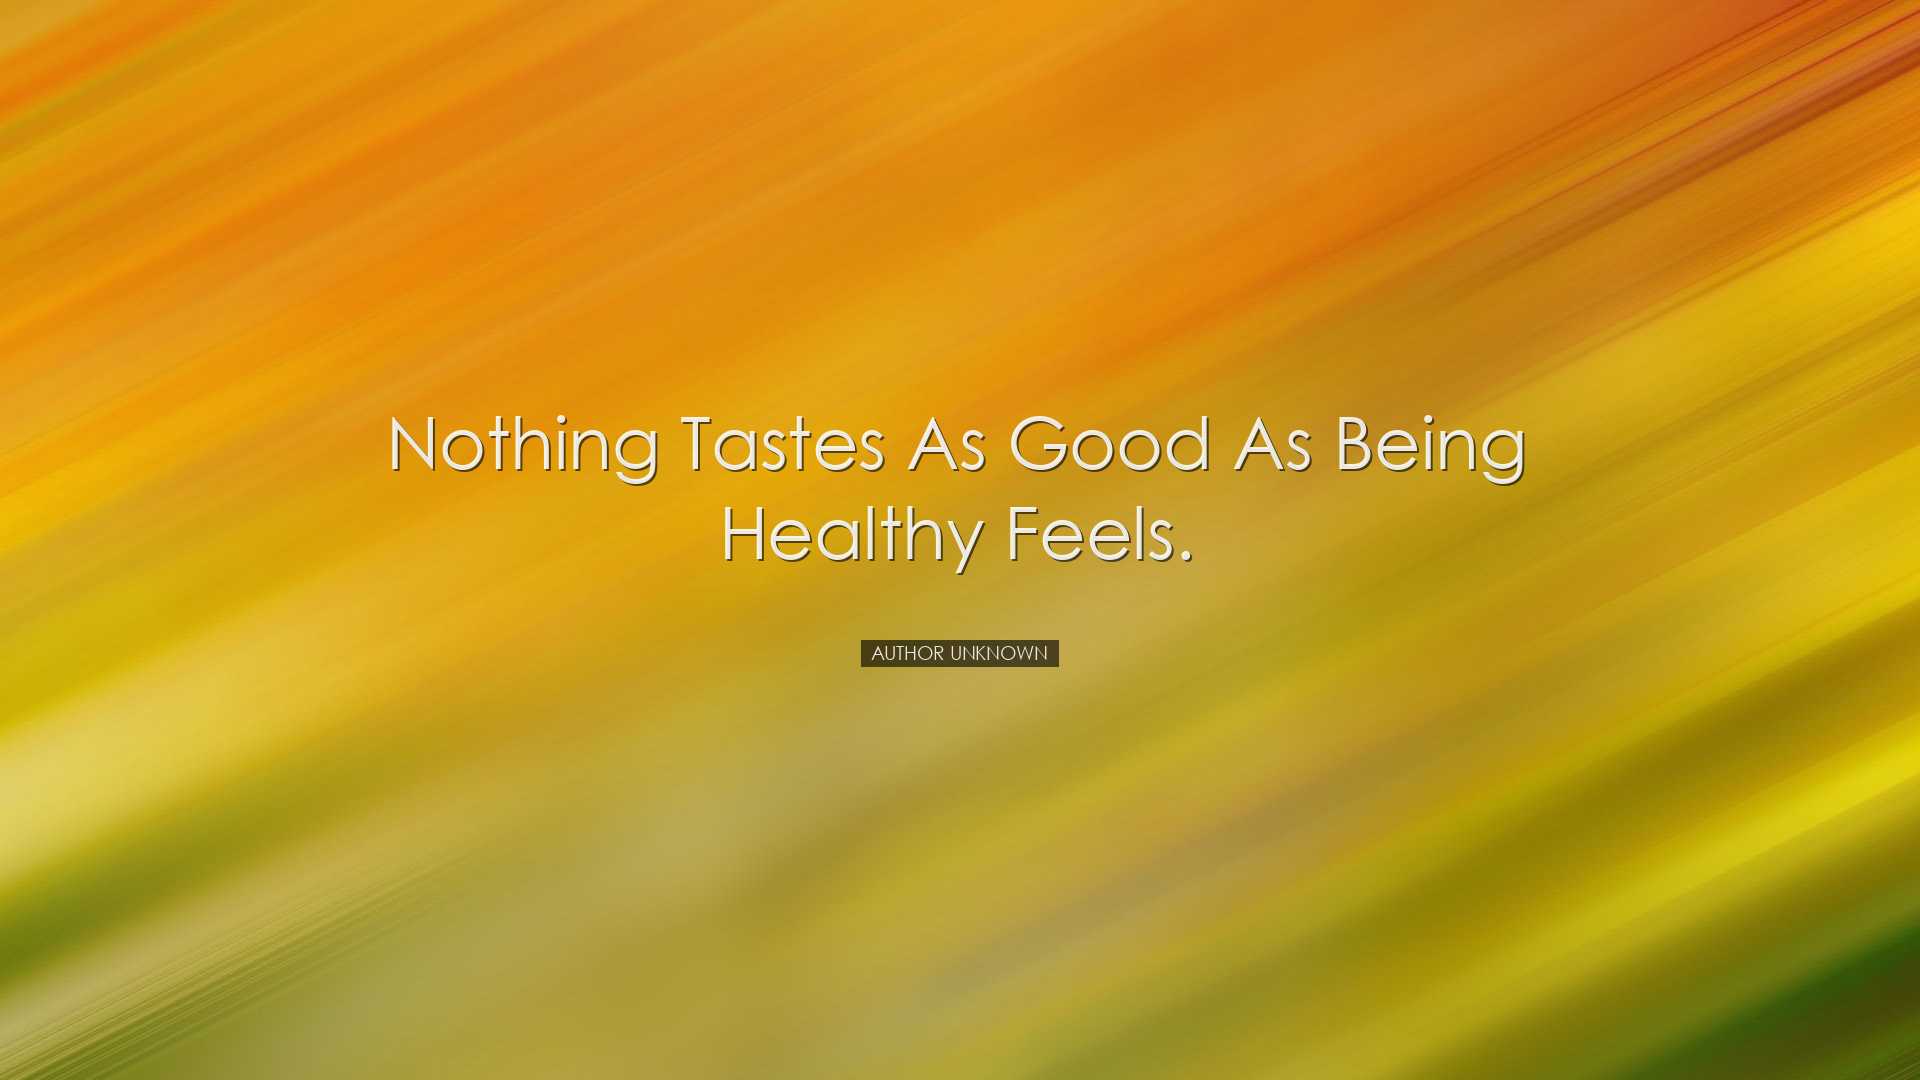 Nothing tastes as good as being healthy feels. - Author unknown